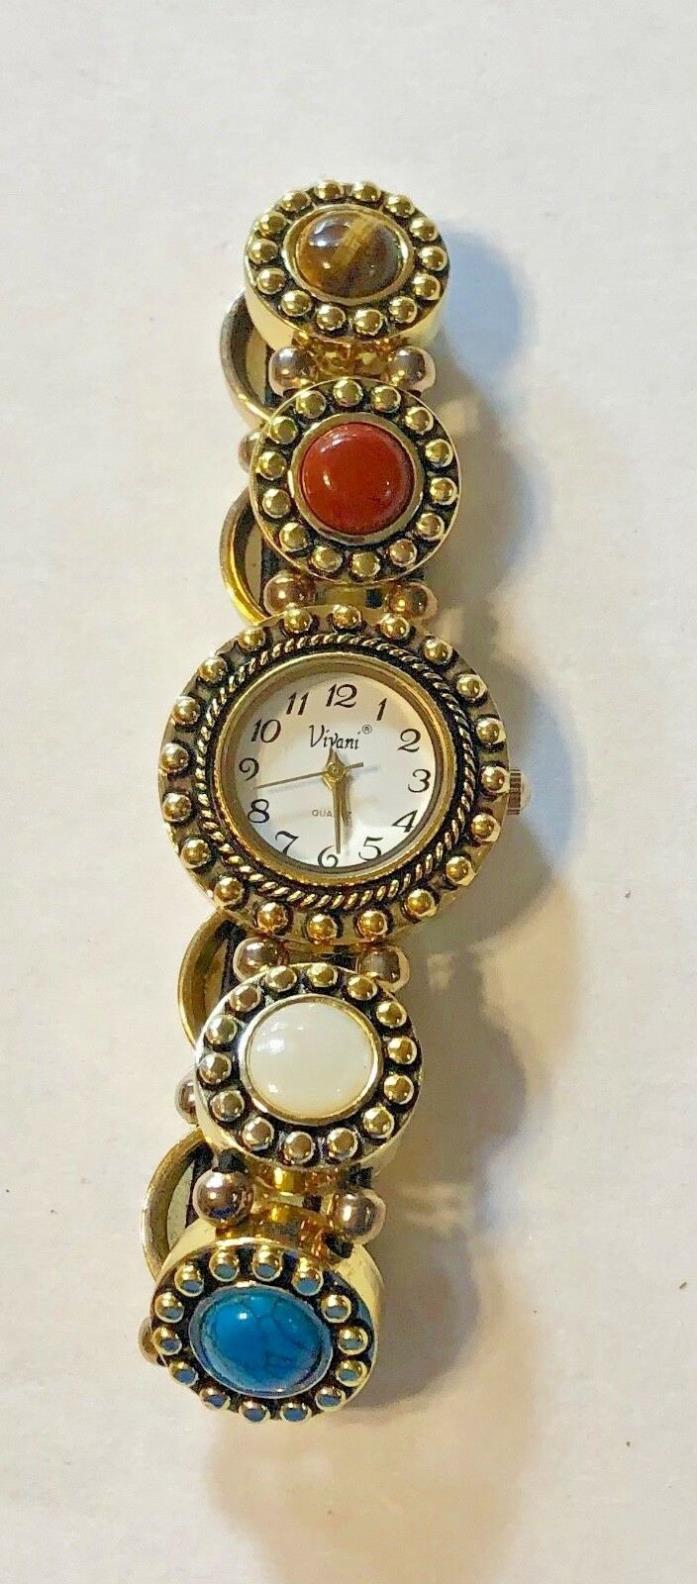 Lovely Ladies Vivani Gold Tone Watch with Faux Gemstone Cabs for Parts, Repairs